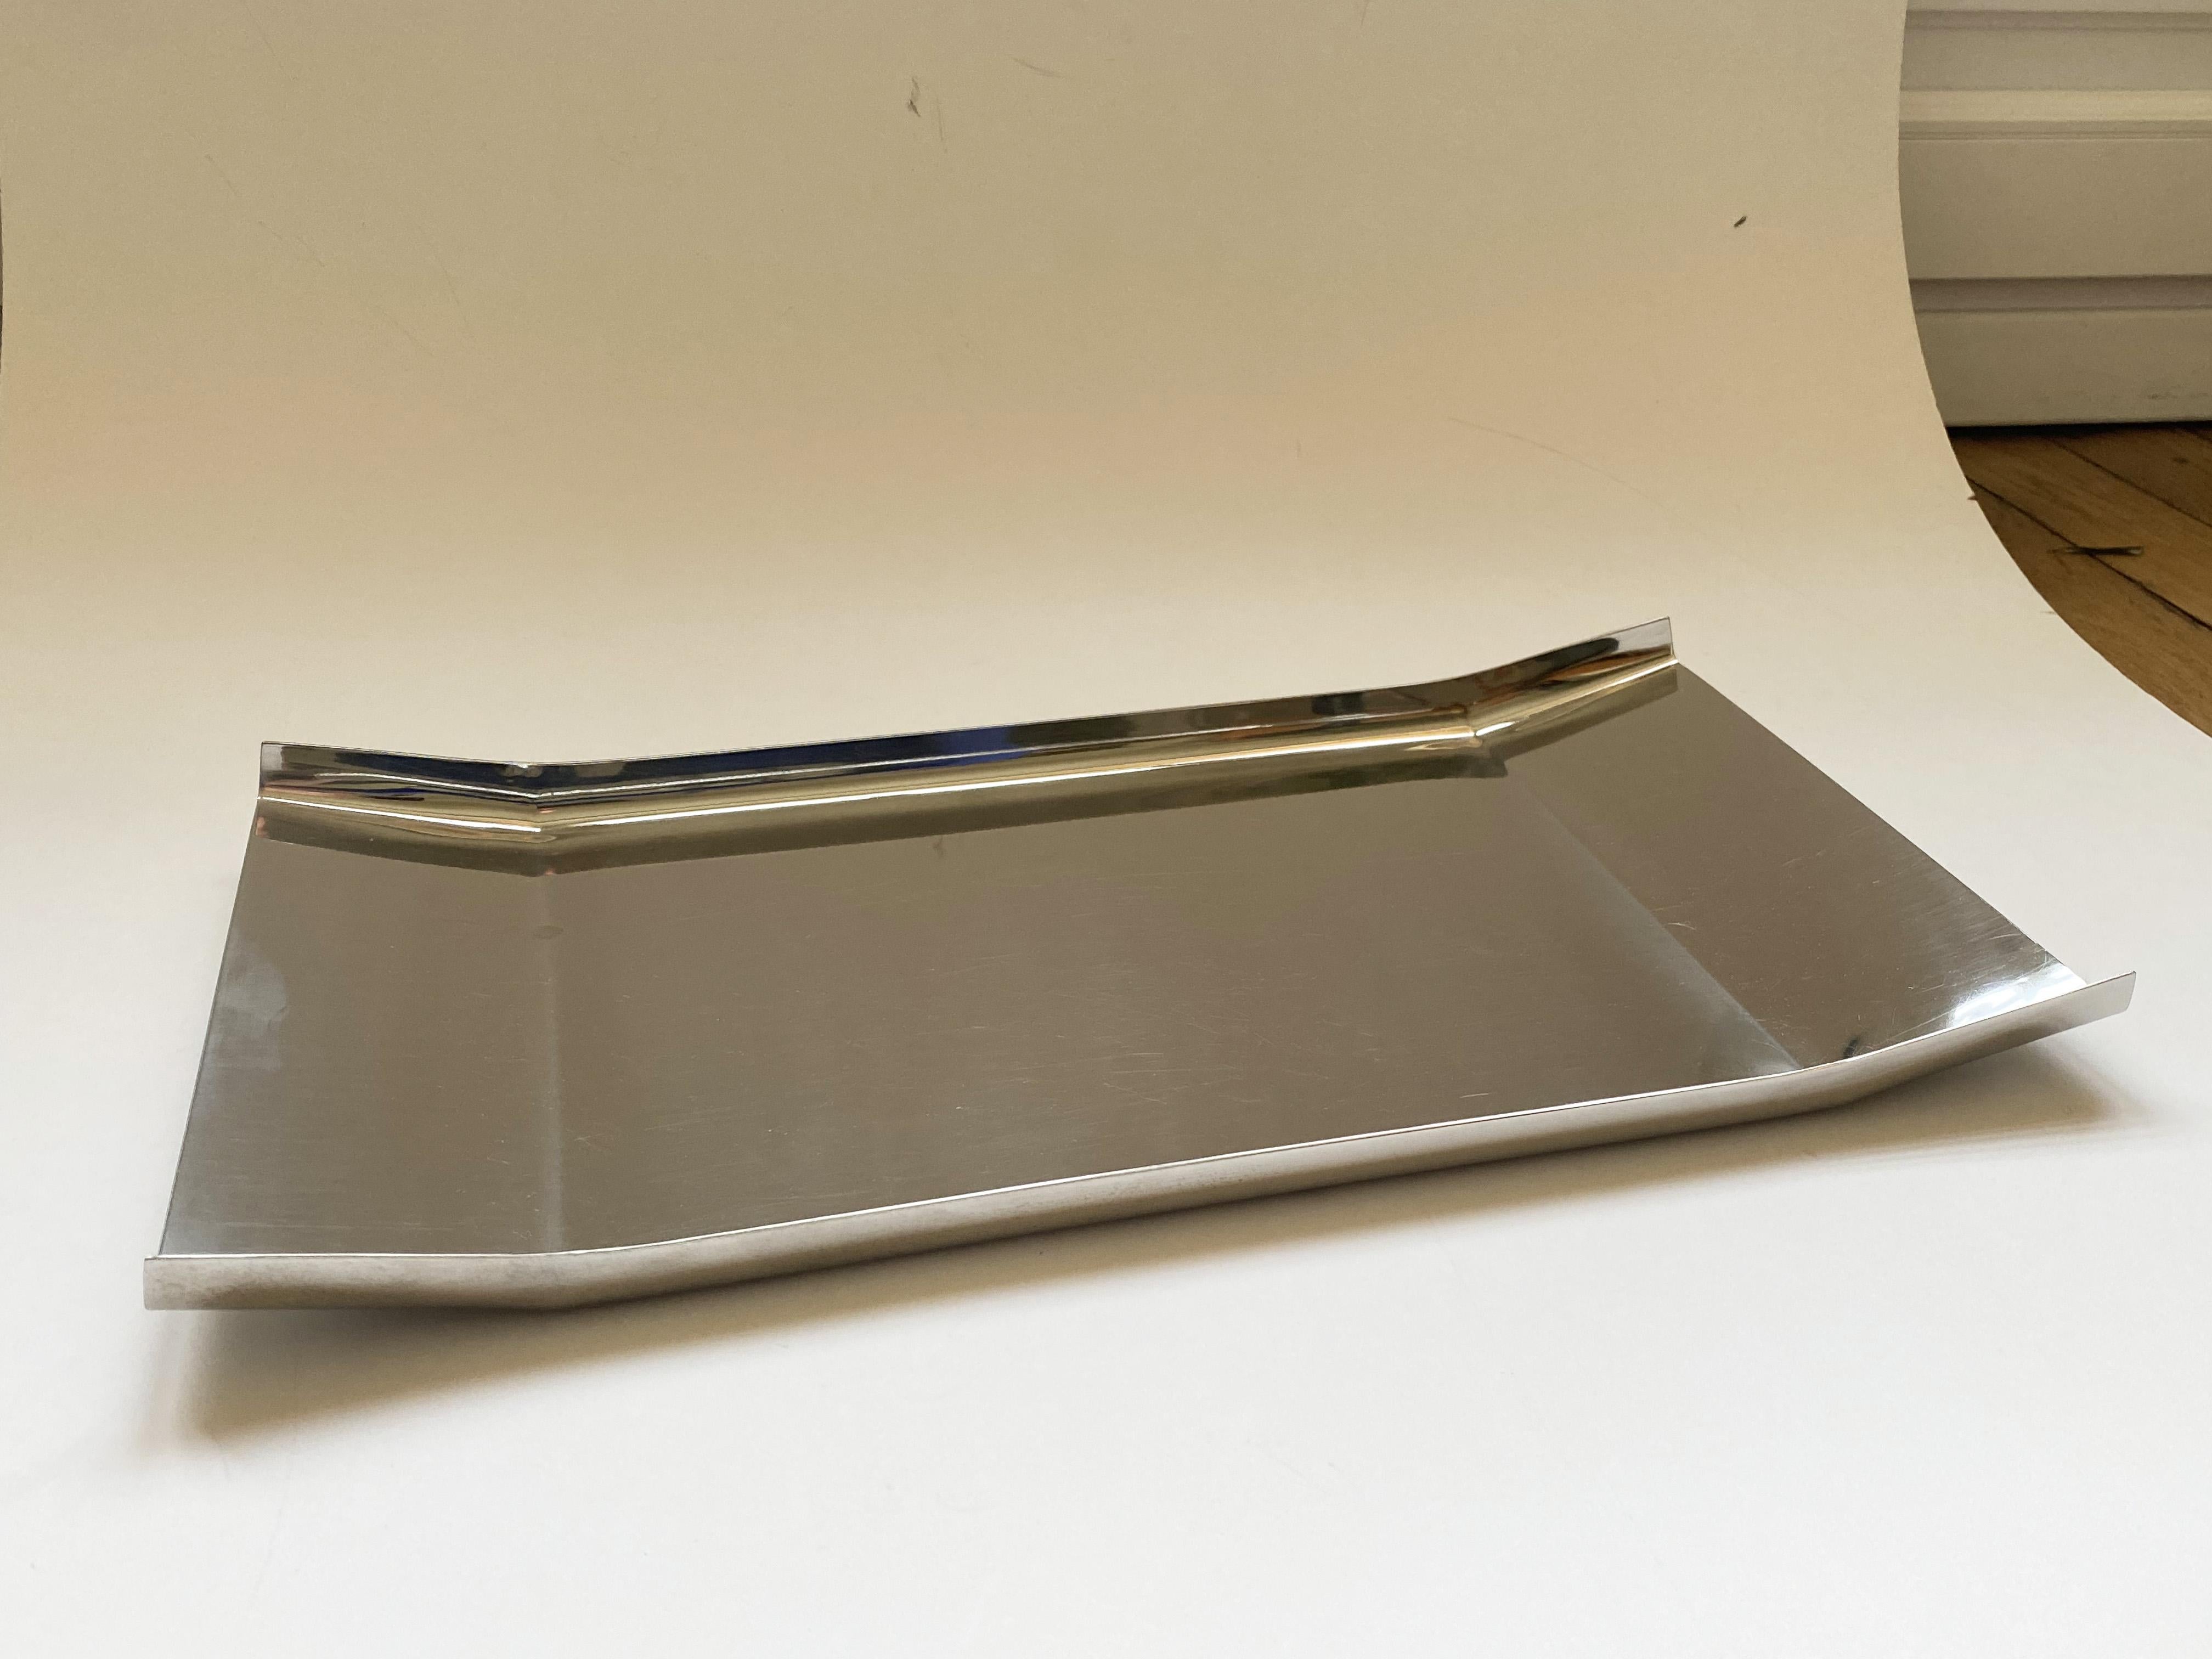 Italian Modernist Arran Tray in Stainless Steel by Enzo Mari for Danese Milano.
Good condition, some scratches.
